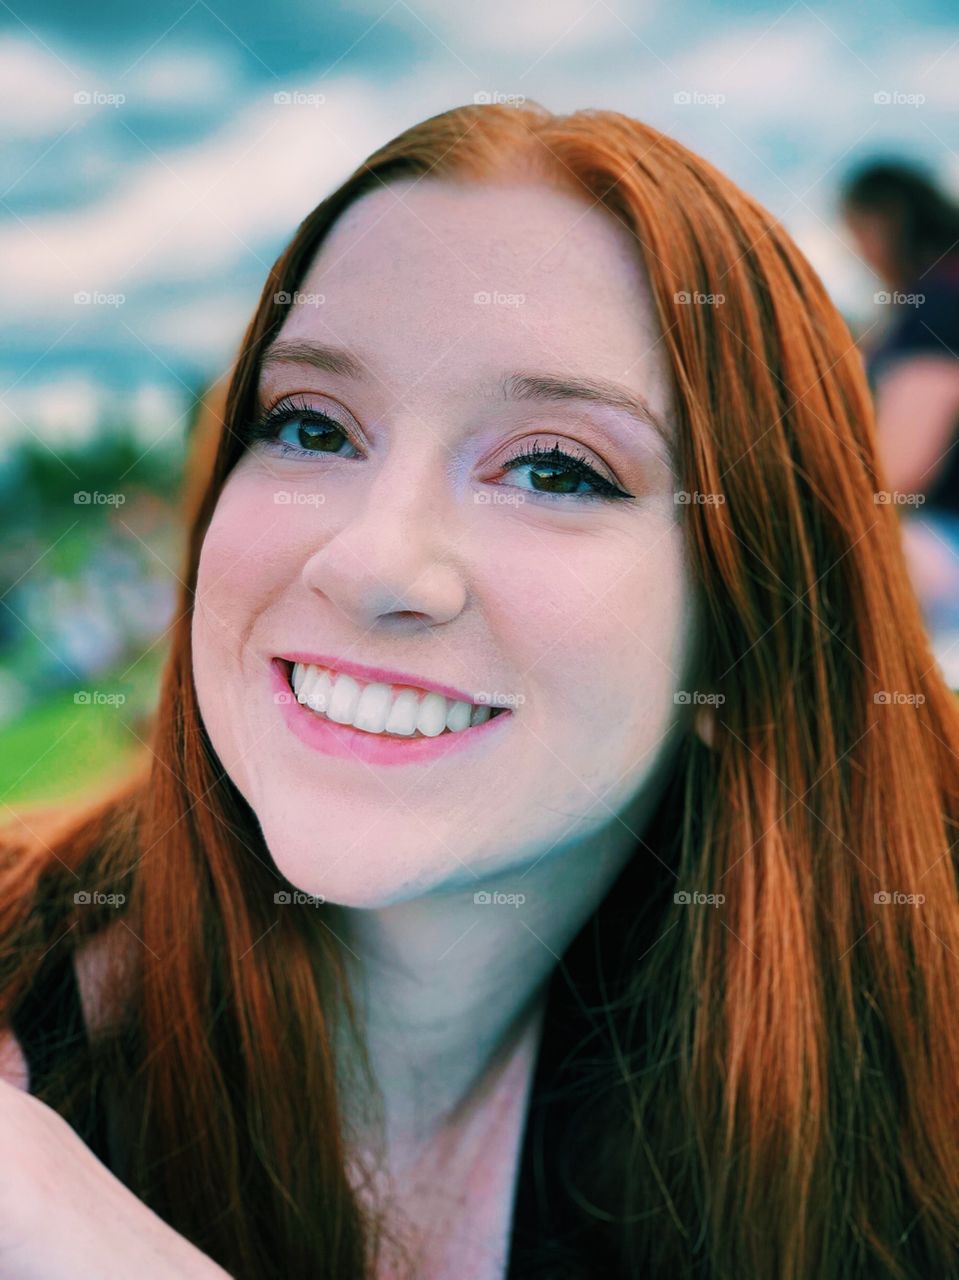 Beautiful up close portrait of a model with red hair at a music festival in the United States having fun and smiling